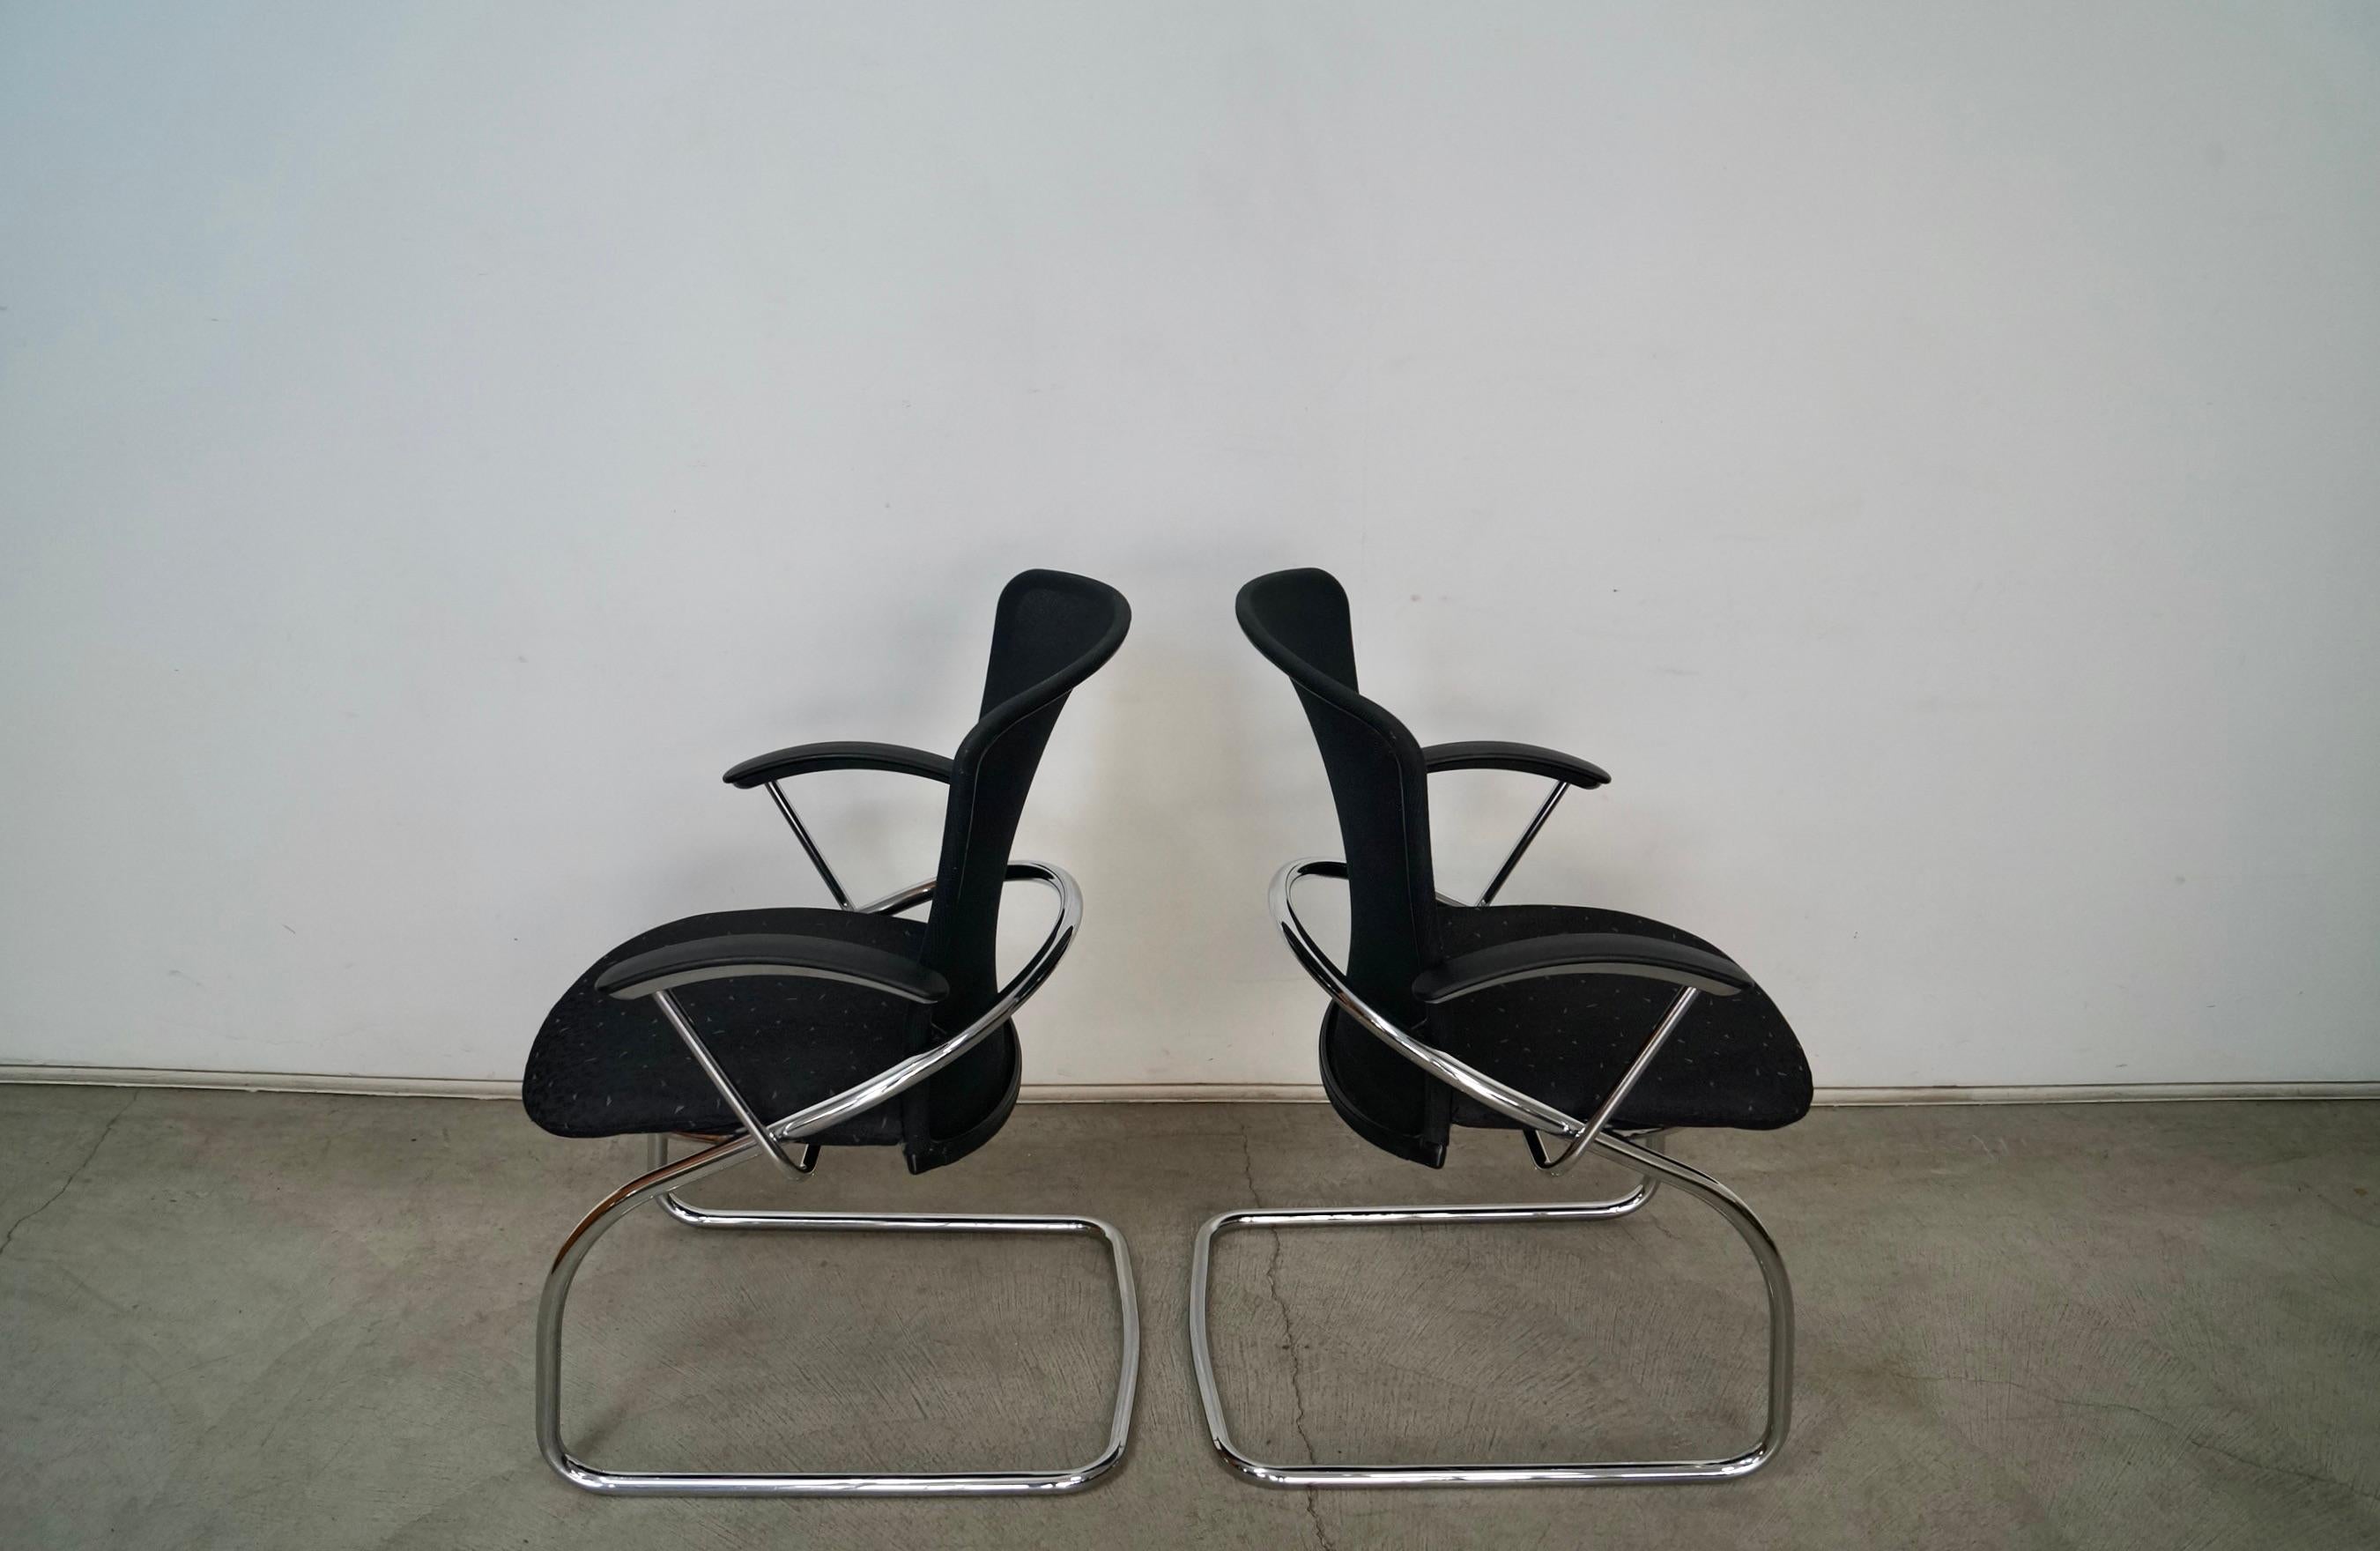 Late 20th Century 1990's Postmodern German Chrome Cantilever Arm Chairs - A Pair For Sale